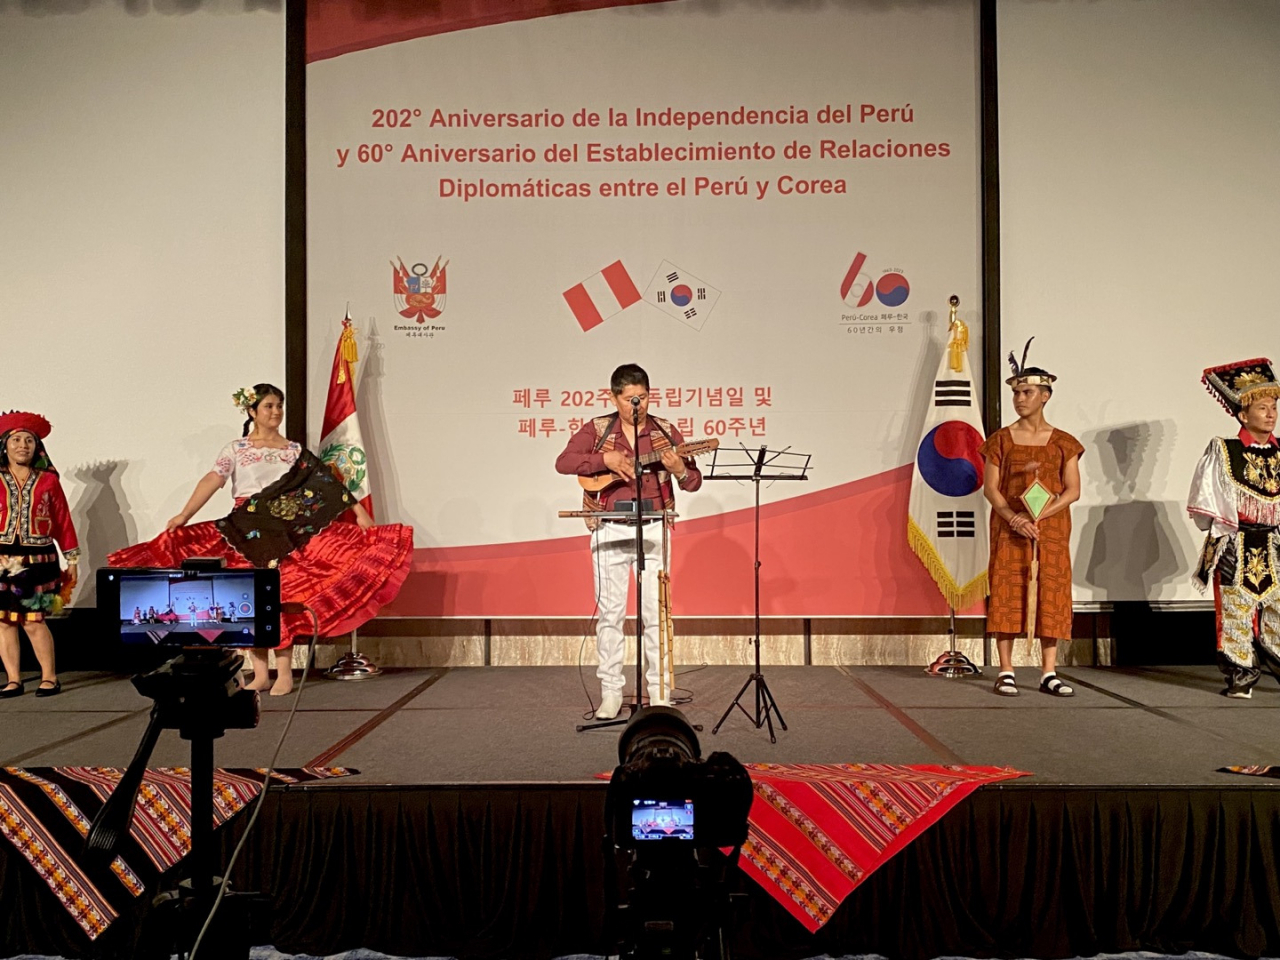 Artists perform a traditional Peruvian dance during the reception of Peru’s 202nd Independence Day celebrations at the Four Seasons Hotel in Seoul on July 27. (Sanjay Kumar/The Korea Herald)